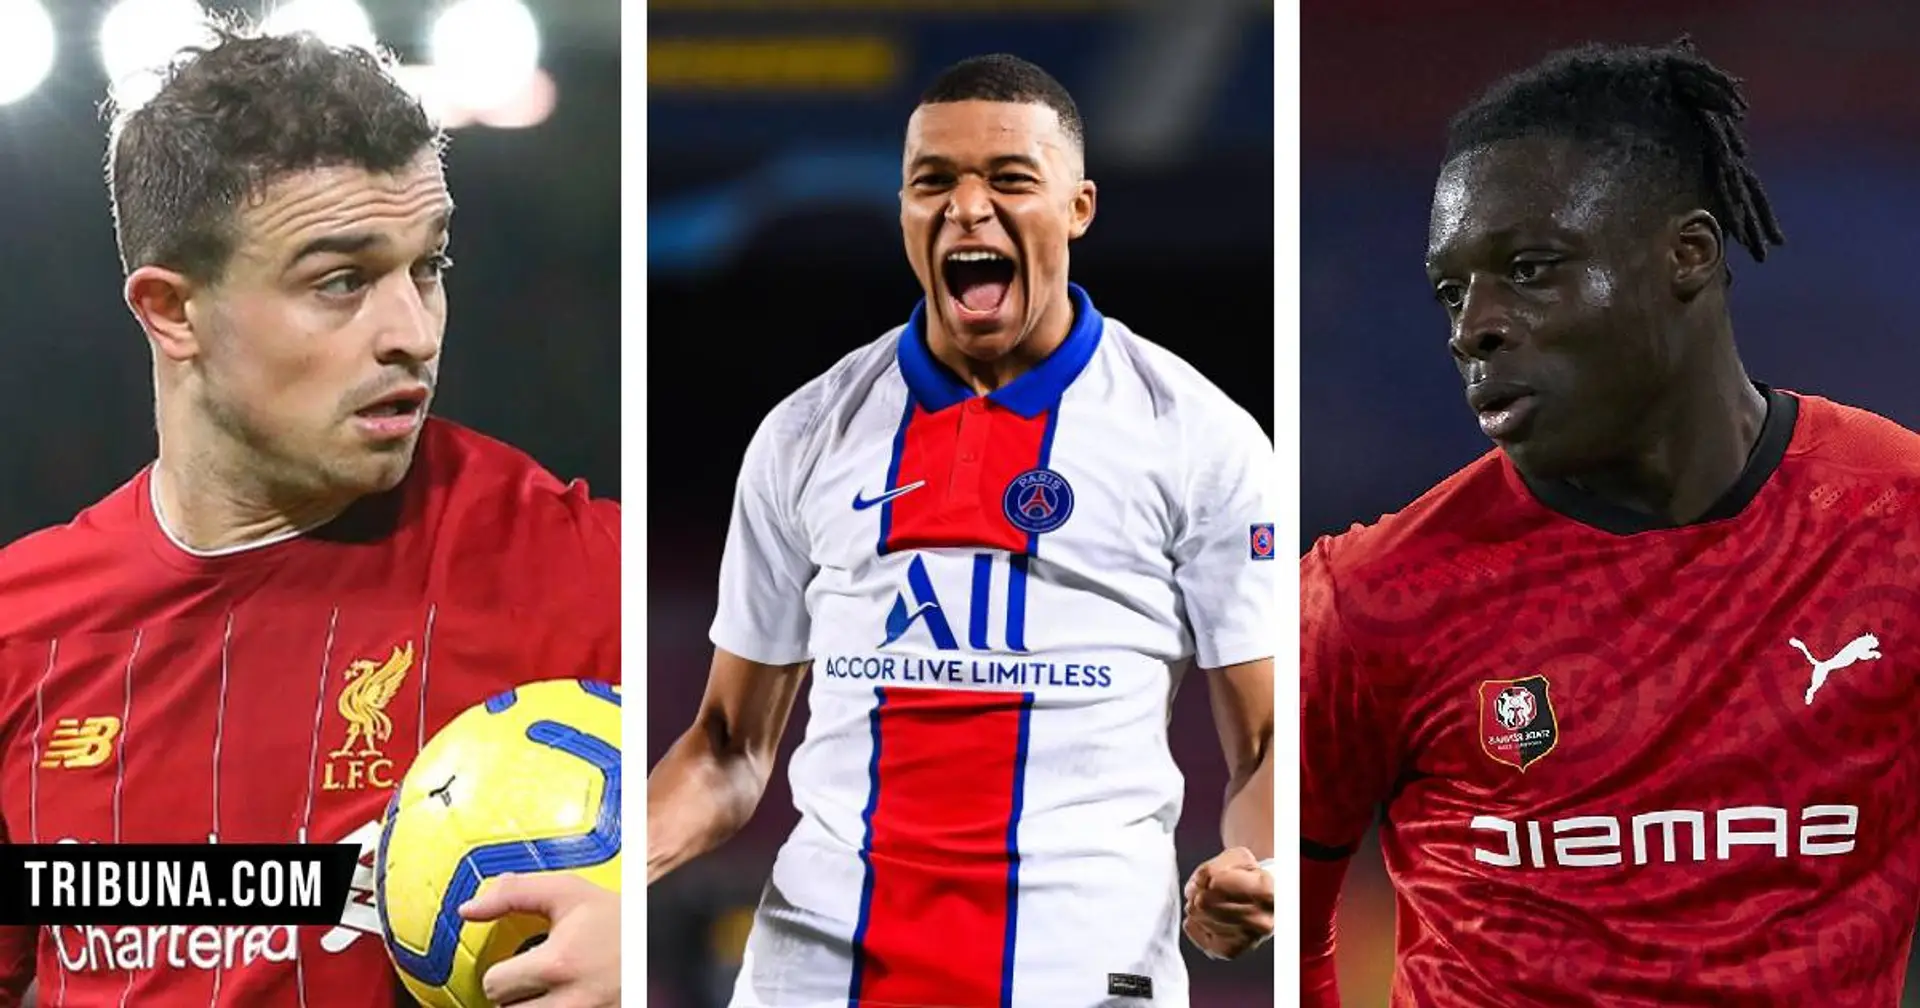 New Mbappe rumours, Shaq nears exit & more: Liverpool's latest transfer round-up with probability ratings